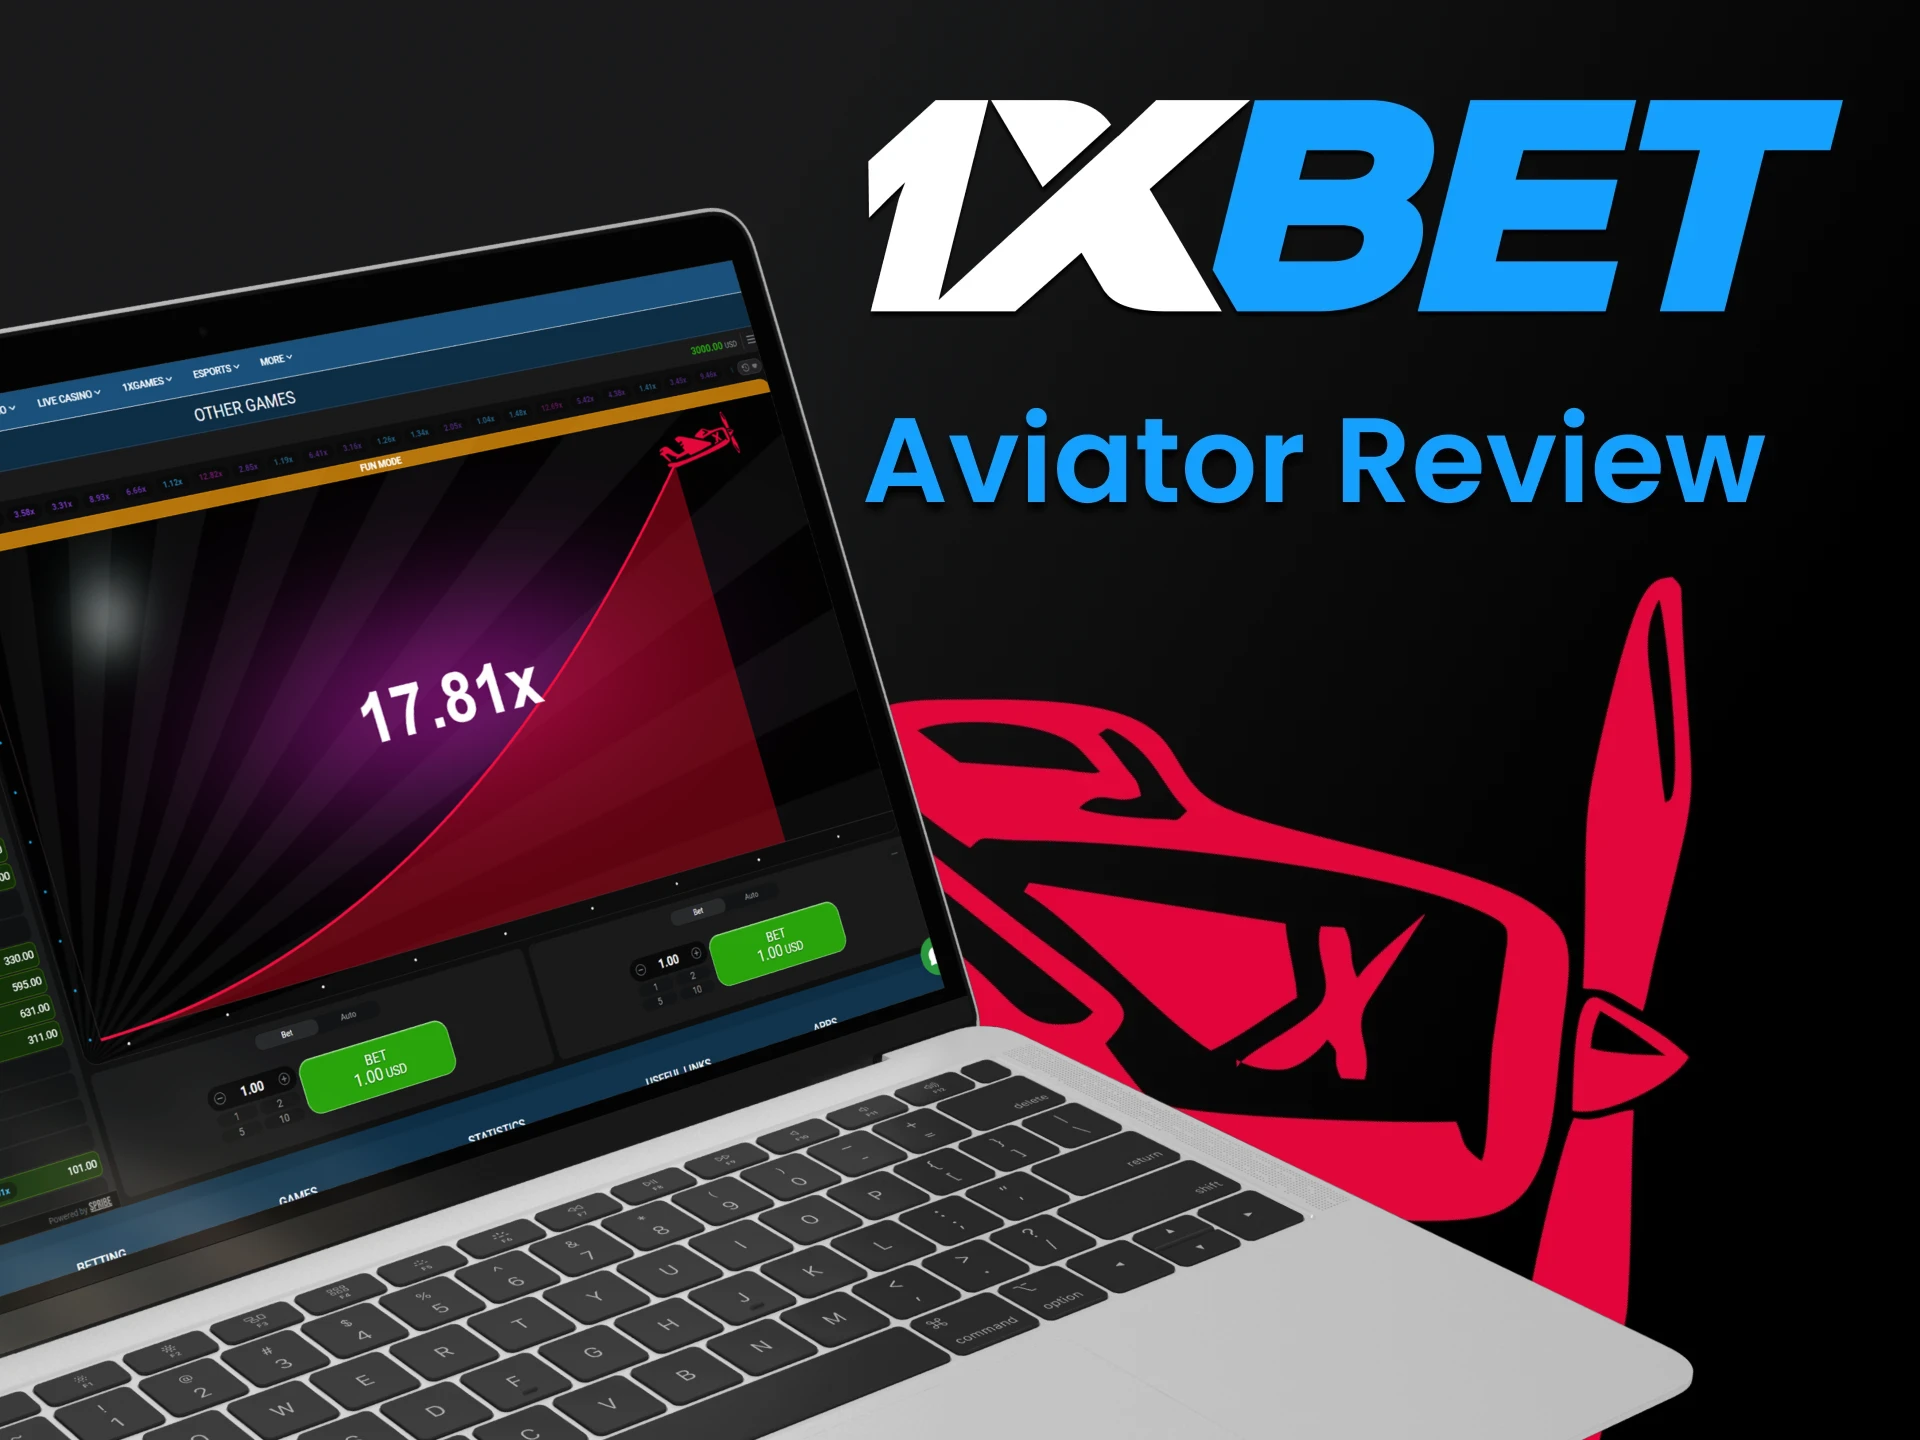 Play the game Aviator on the 1xbet platform.